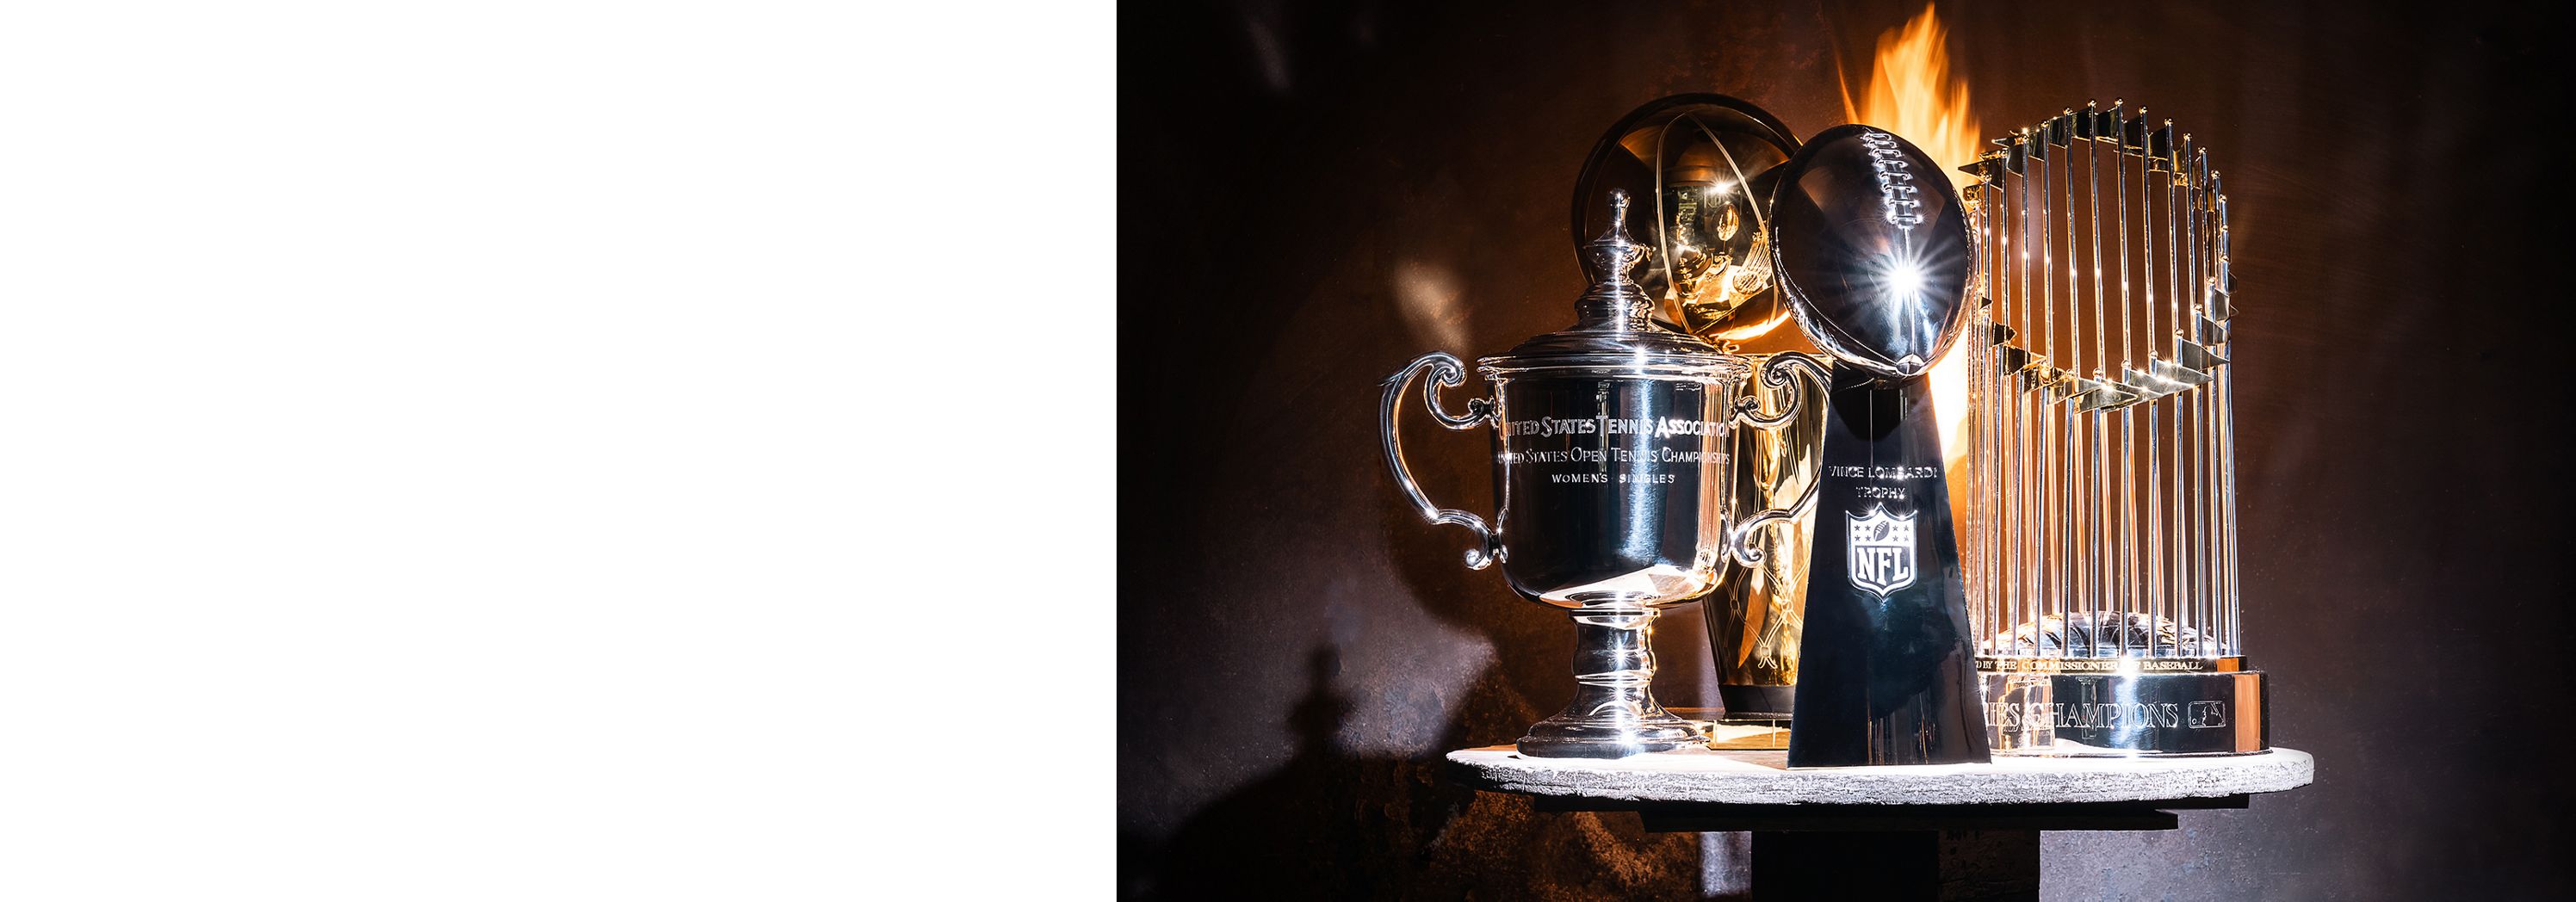 Riot Games And Tiffany & Co. To Redesign League Of Legends' Esports Trophy